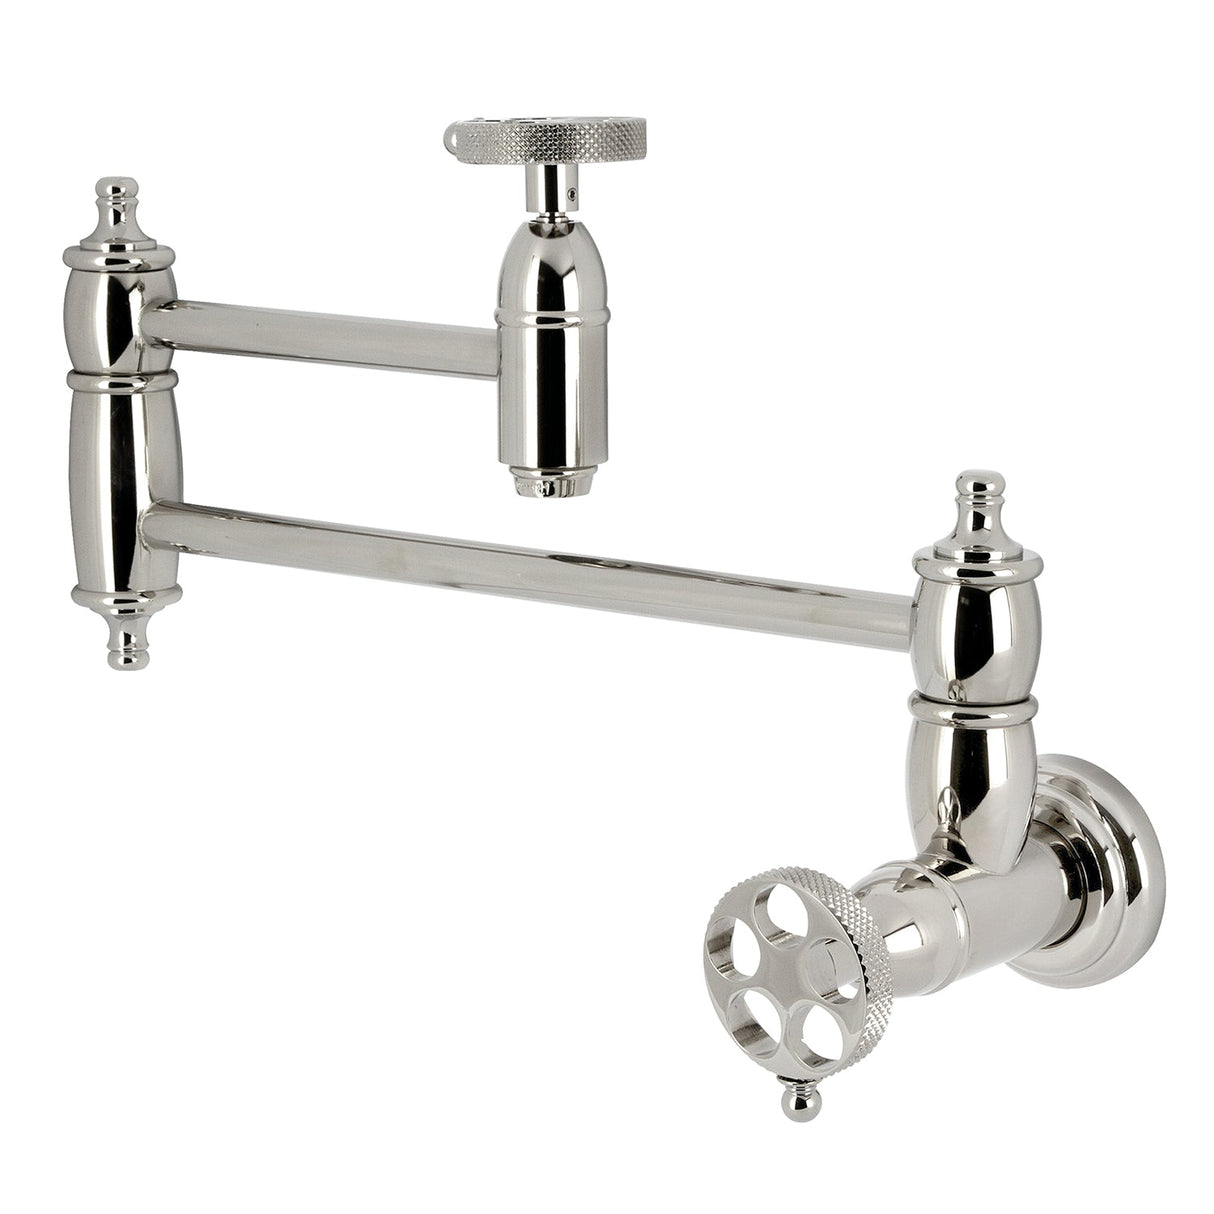 Webb KS3106RKX Two-Handle 1-Hole Wall Mount Pot Filler with Knurled Handle, Polished Nickel